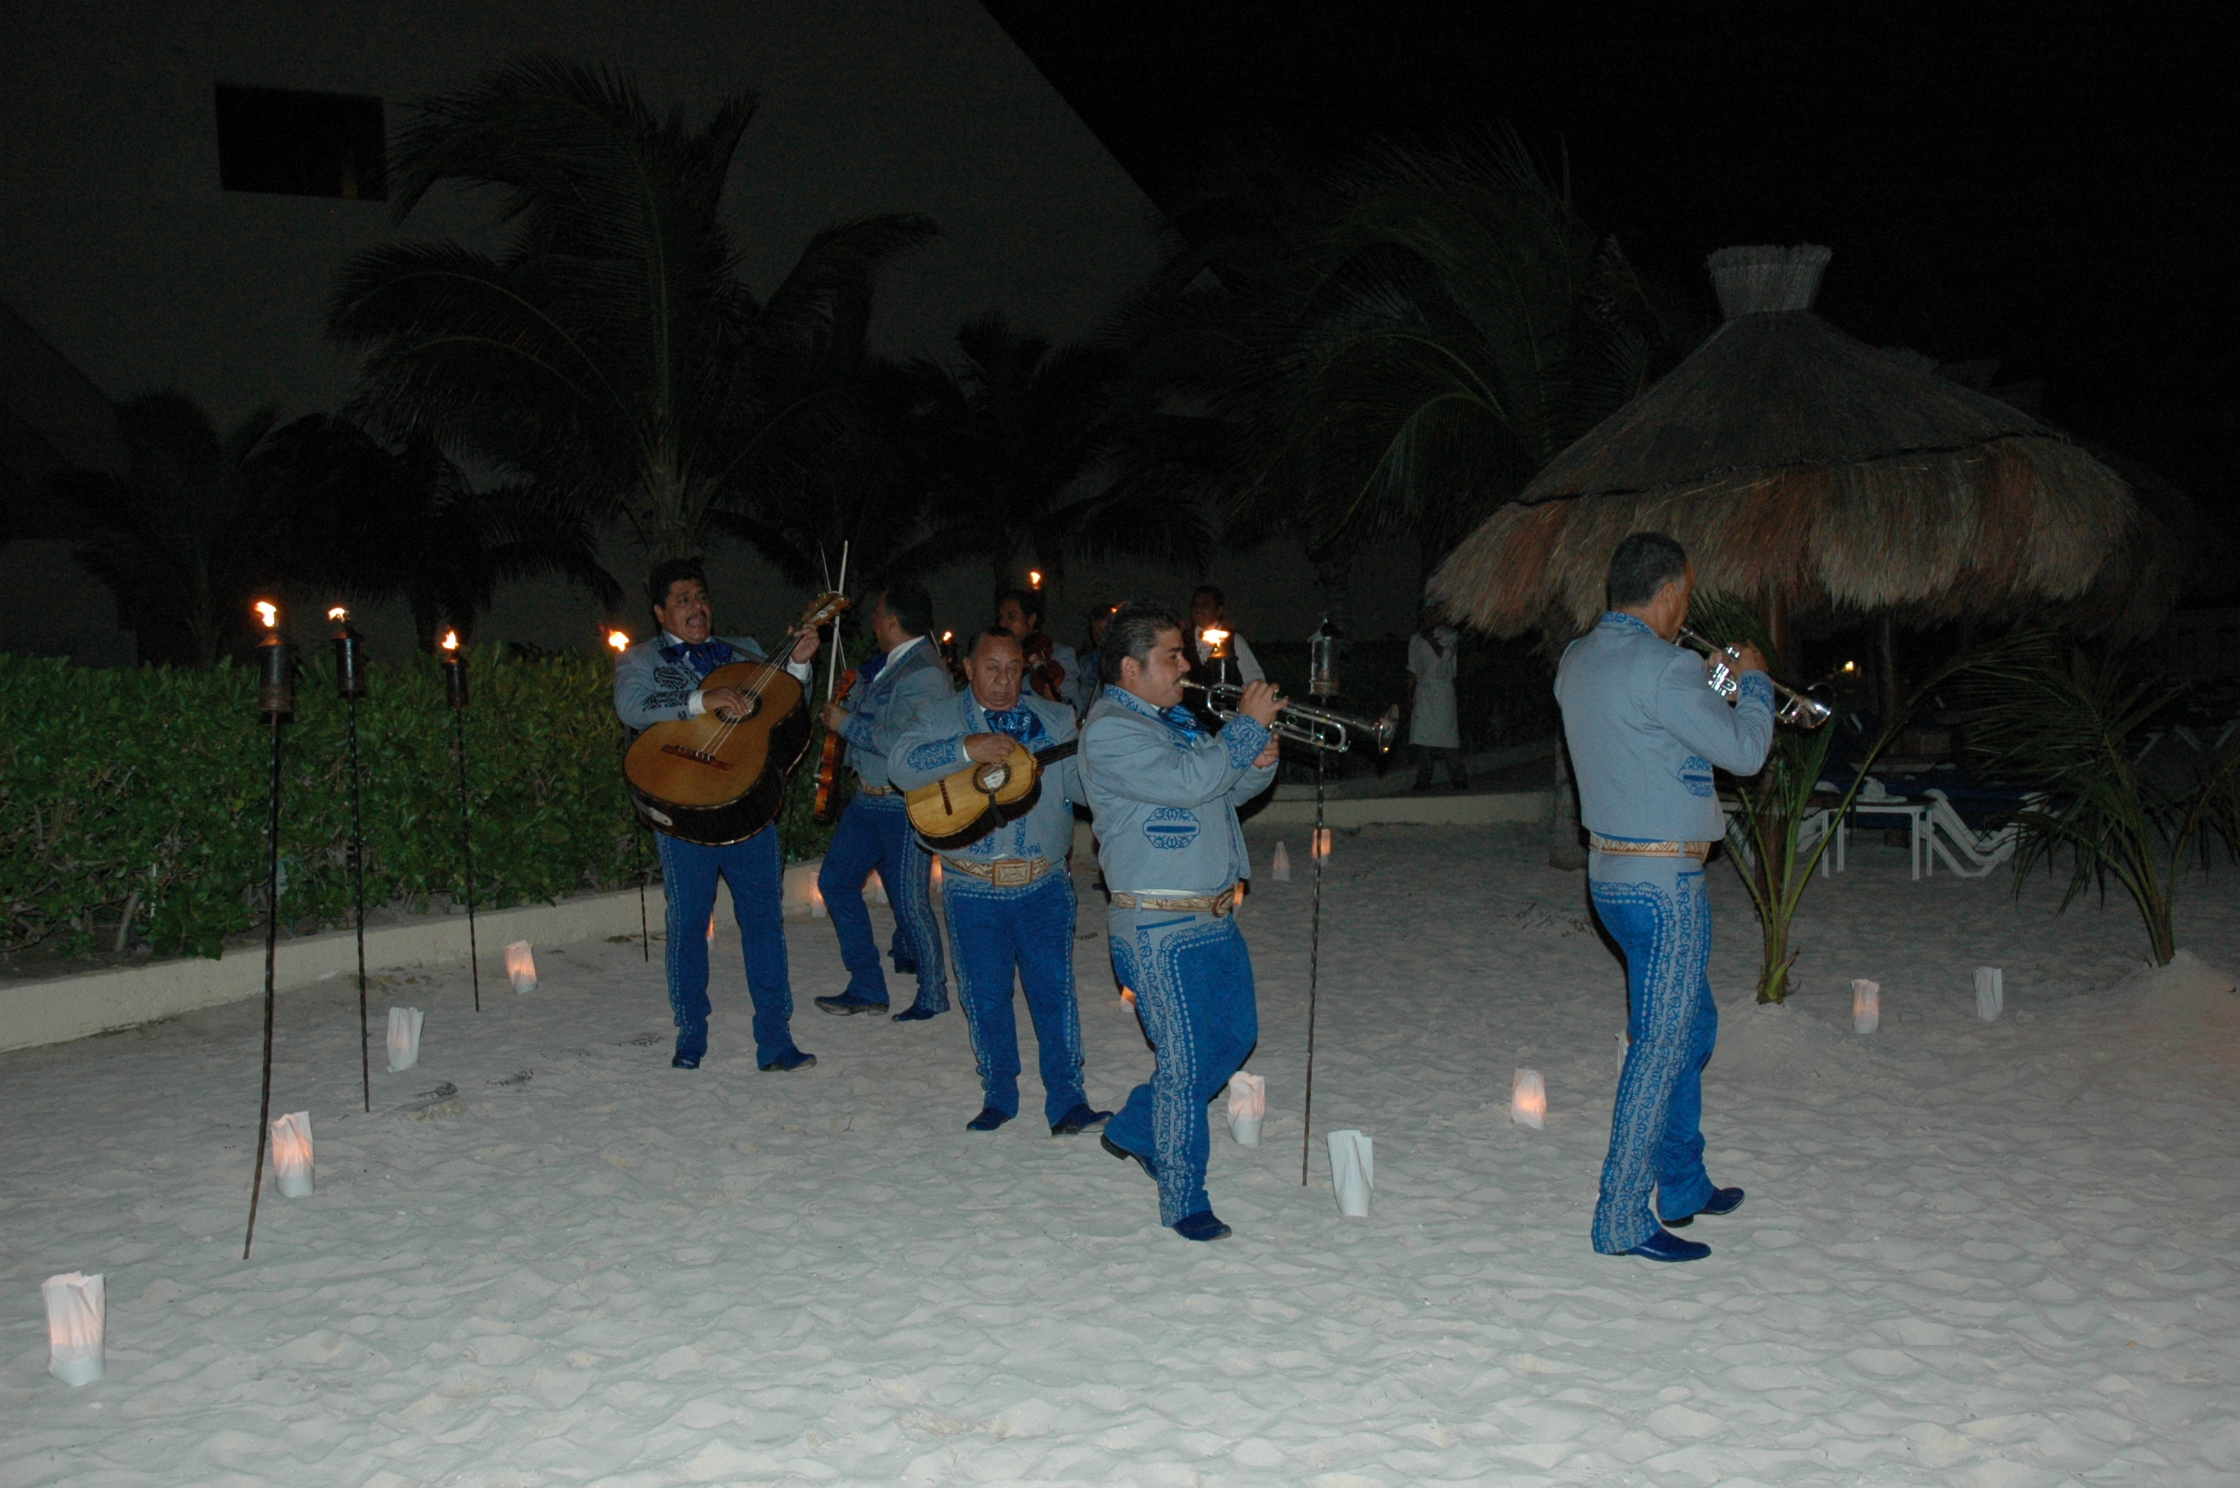 Then we were treated to the full flavor of Mexico--courtesy of the Mariachis!